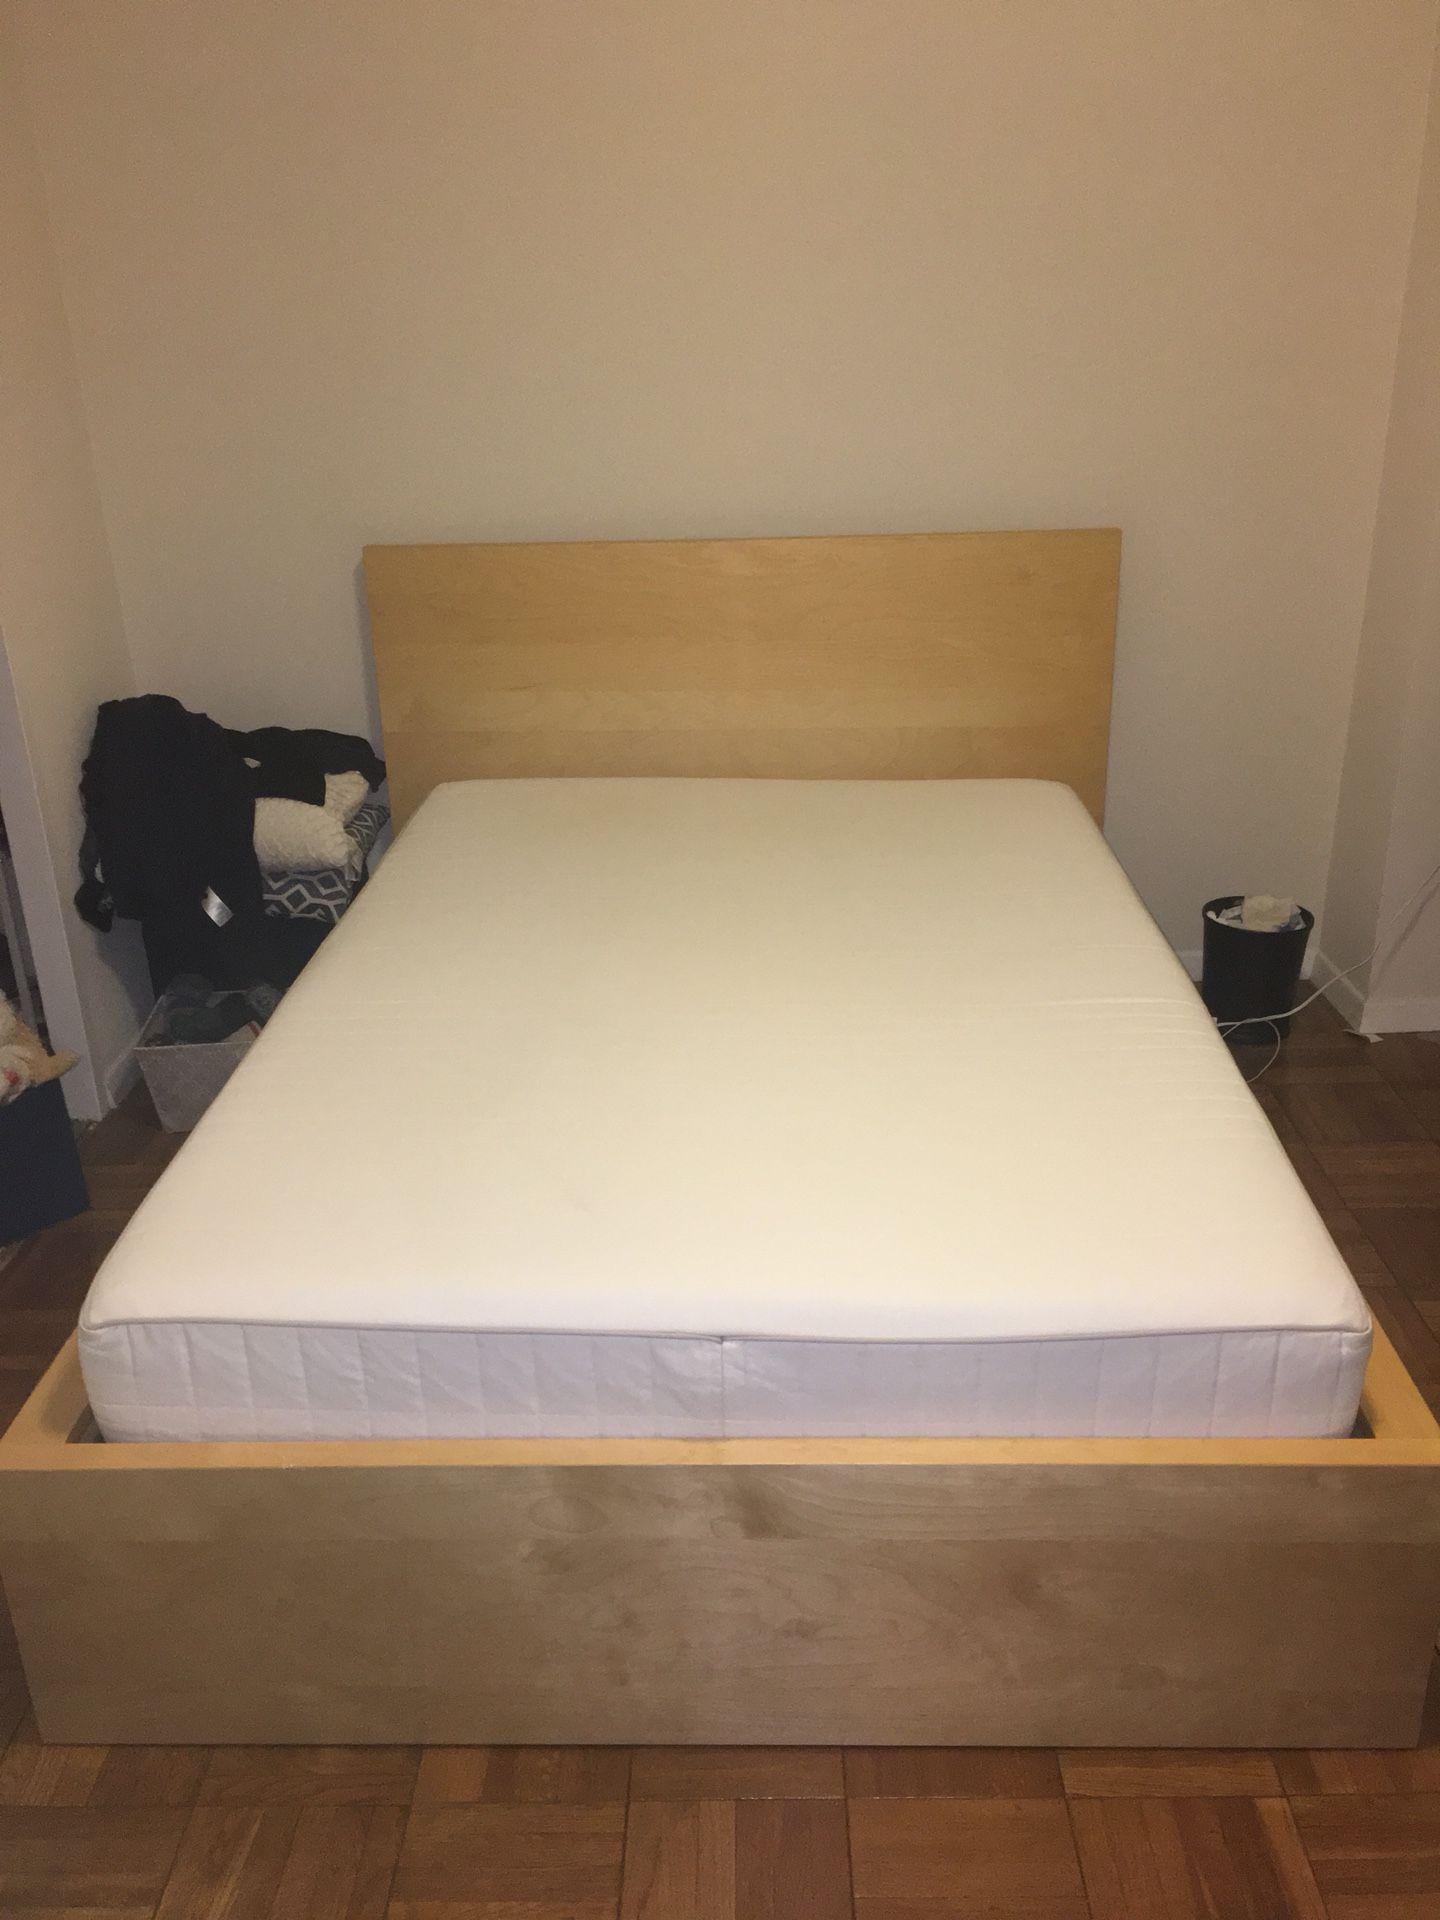 Full sized wooden bed frame and mattress